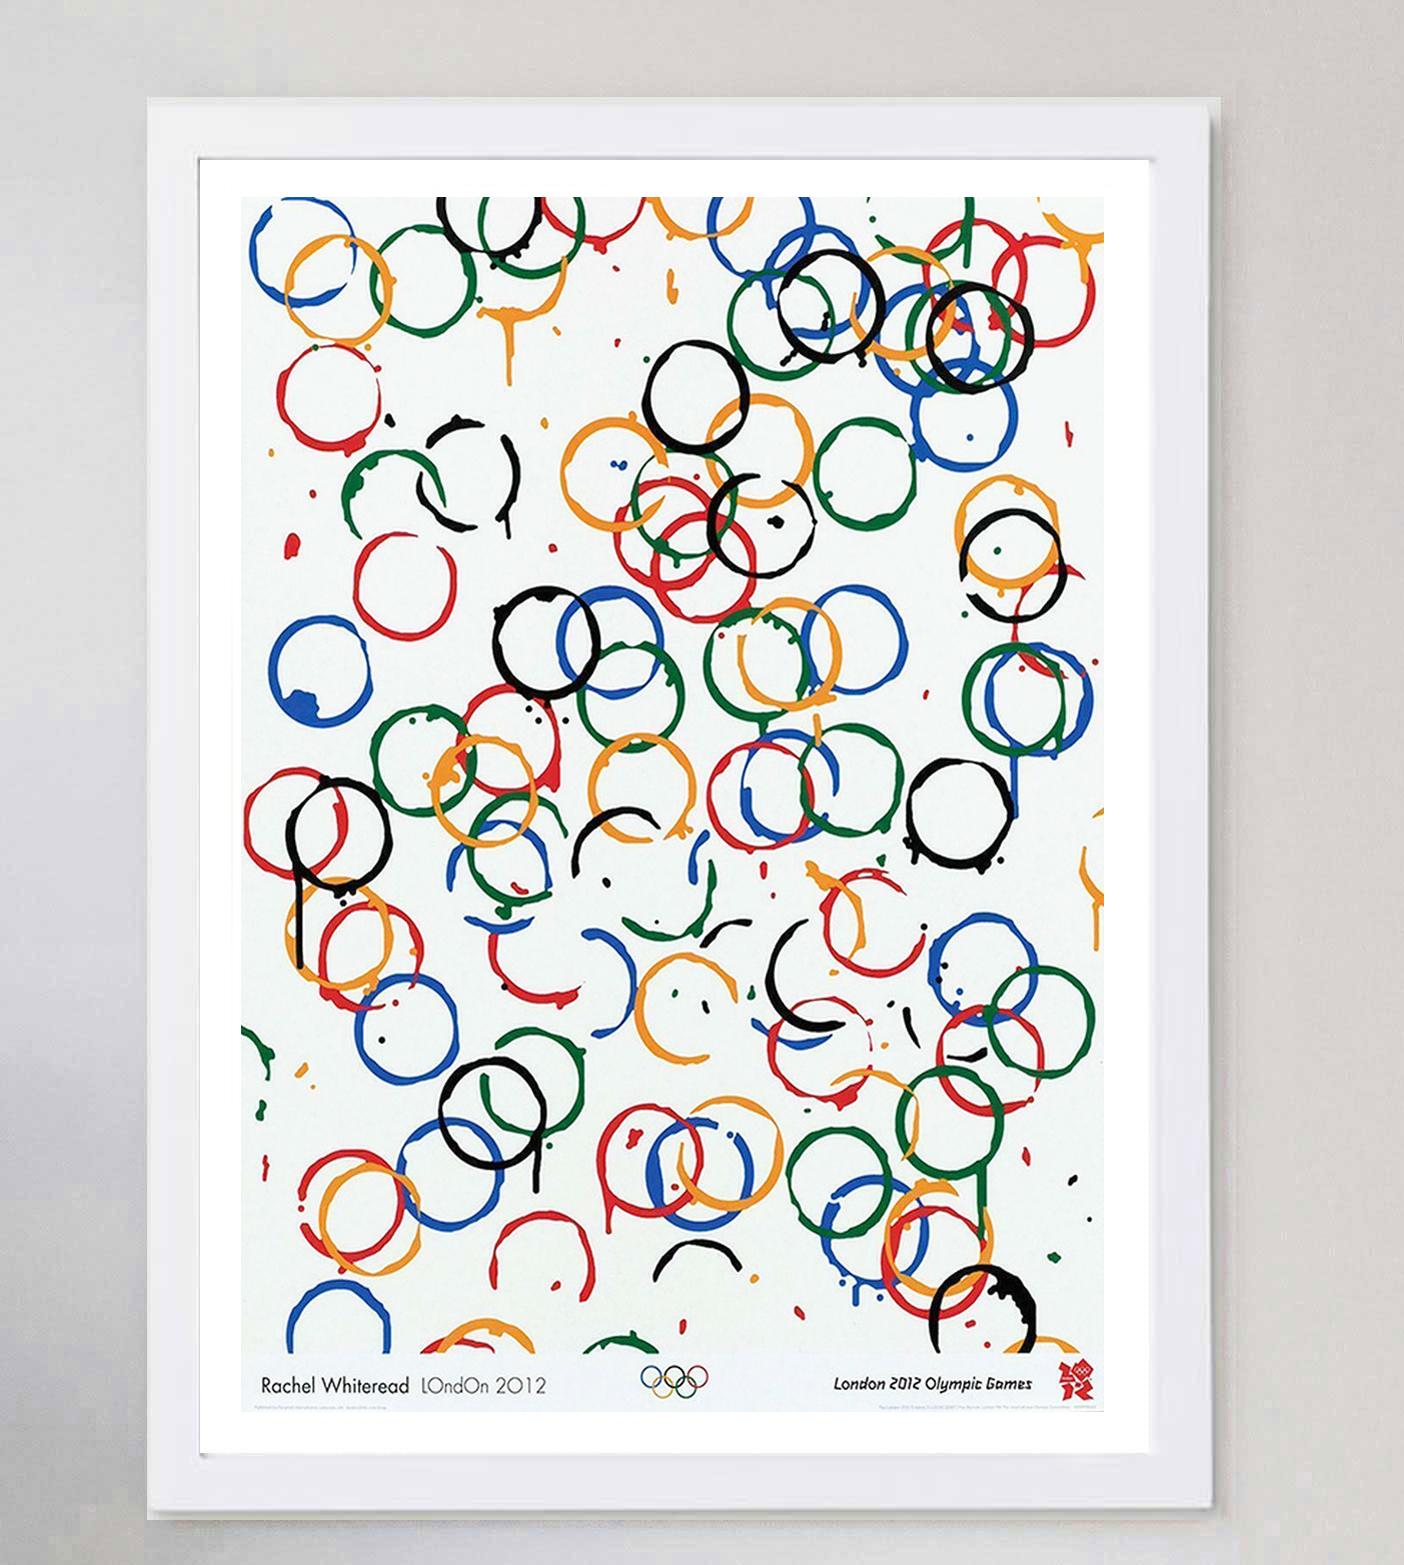 English 2012 London Olympic Games - Rachel Whiteread Original Vintage Poster For Sale